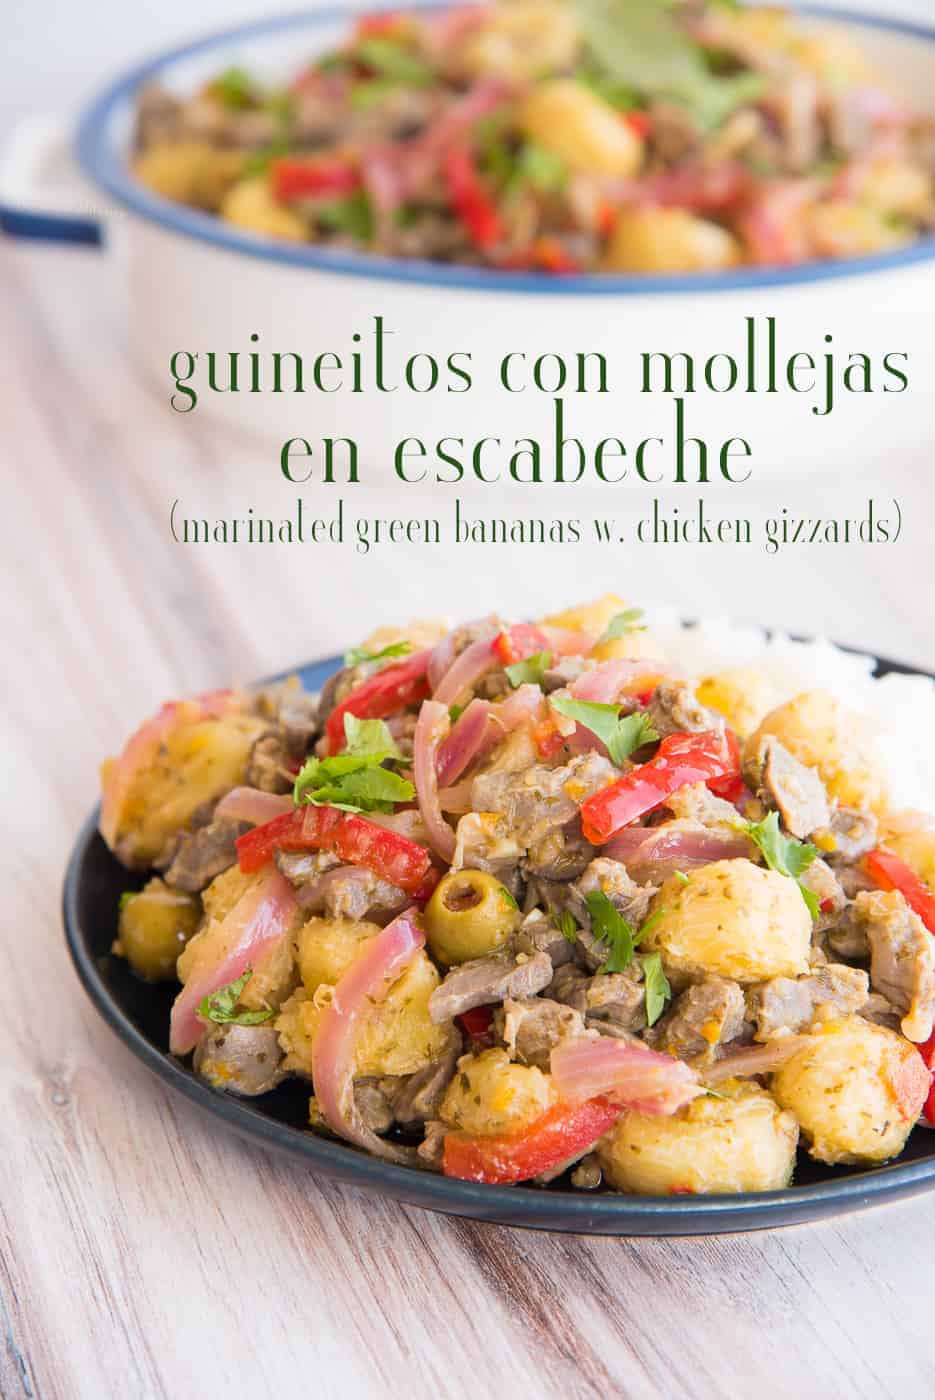 Guineitos con Mollejas en Escabeche is a popular dish during the Puerto Rican holidays. It pays homage to the flavors and ingredients of the African heritage, while filling your mouth with bold and contrasting flavors and textures. Chicken gizzards are very similar in flavor to dark meat chicken so you'll love this. #mollejas #chickengizzards #guineoverde #greenbananas #mollejasenescabeche #guineosenescabeche #PuertoRican #PuertoRicanrecipes #holidayrecipe #recetasnavideños #Navidad #Christmas #Thanksgiving #NewYears #DiaDeLosReyes via @ediblesense